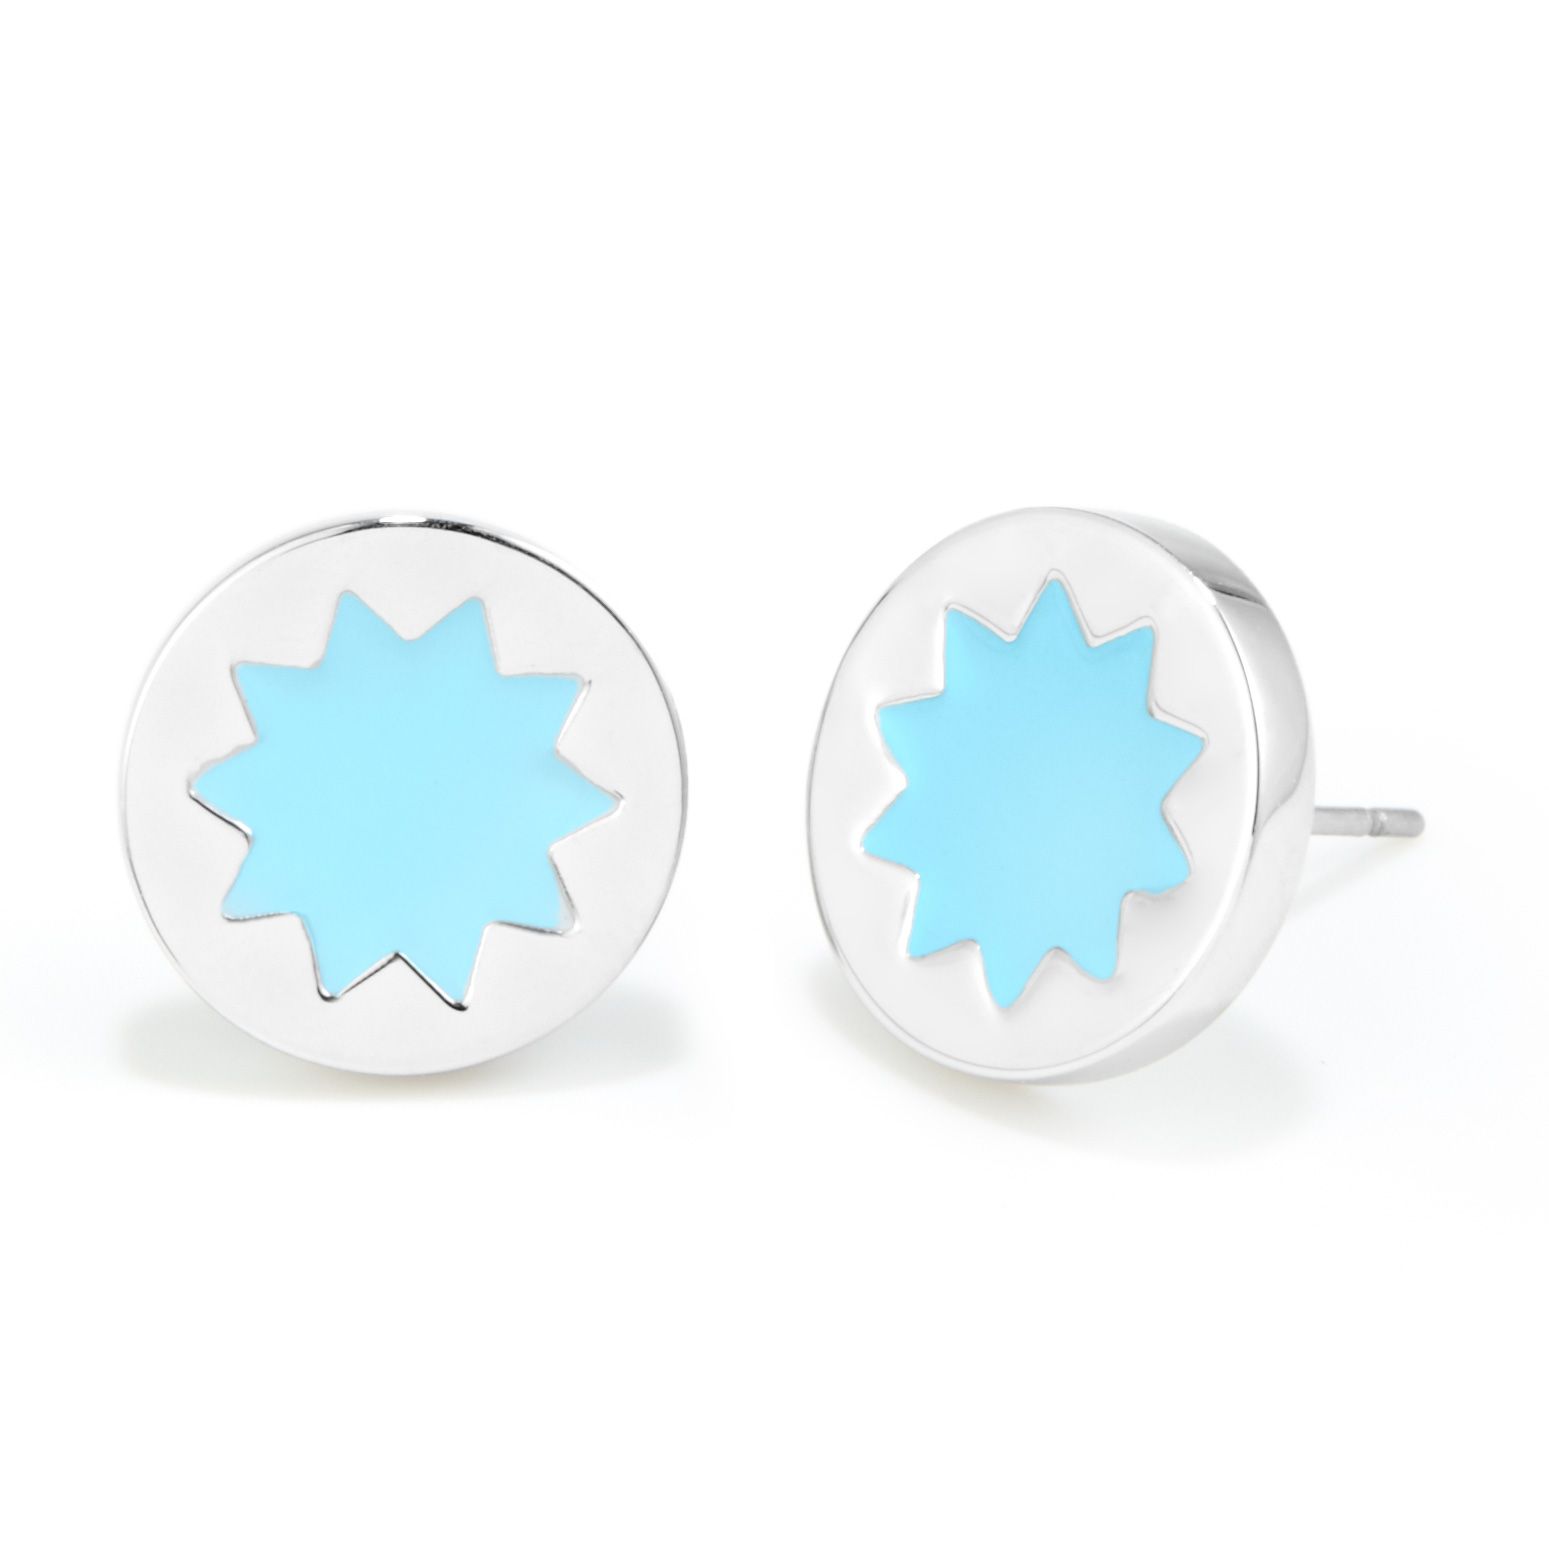 House of Harlow 1960 Mini Sunburst Stud Earrings in Light Blue and Silver - Clearance Final Sale | Eve's Addiction Jewelry